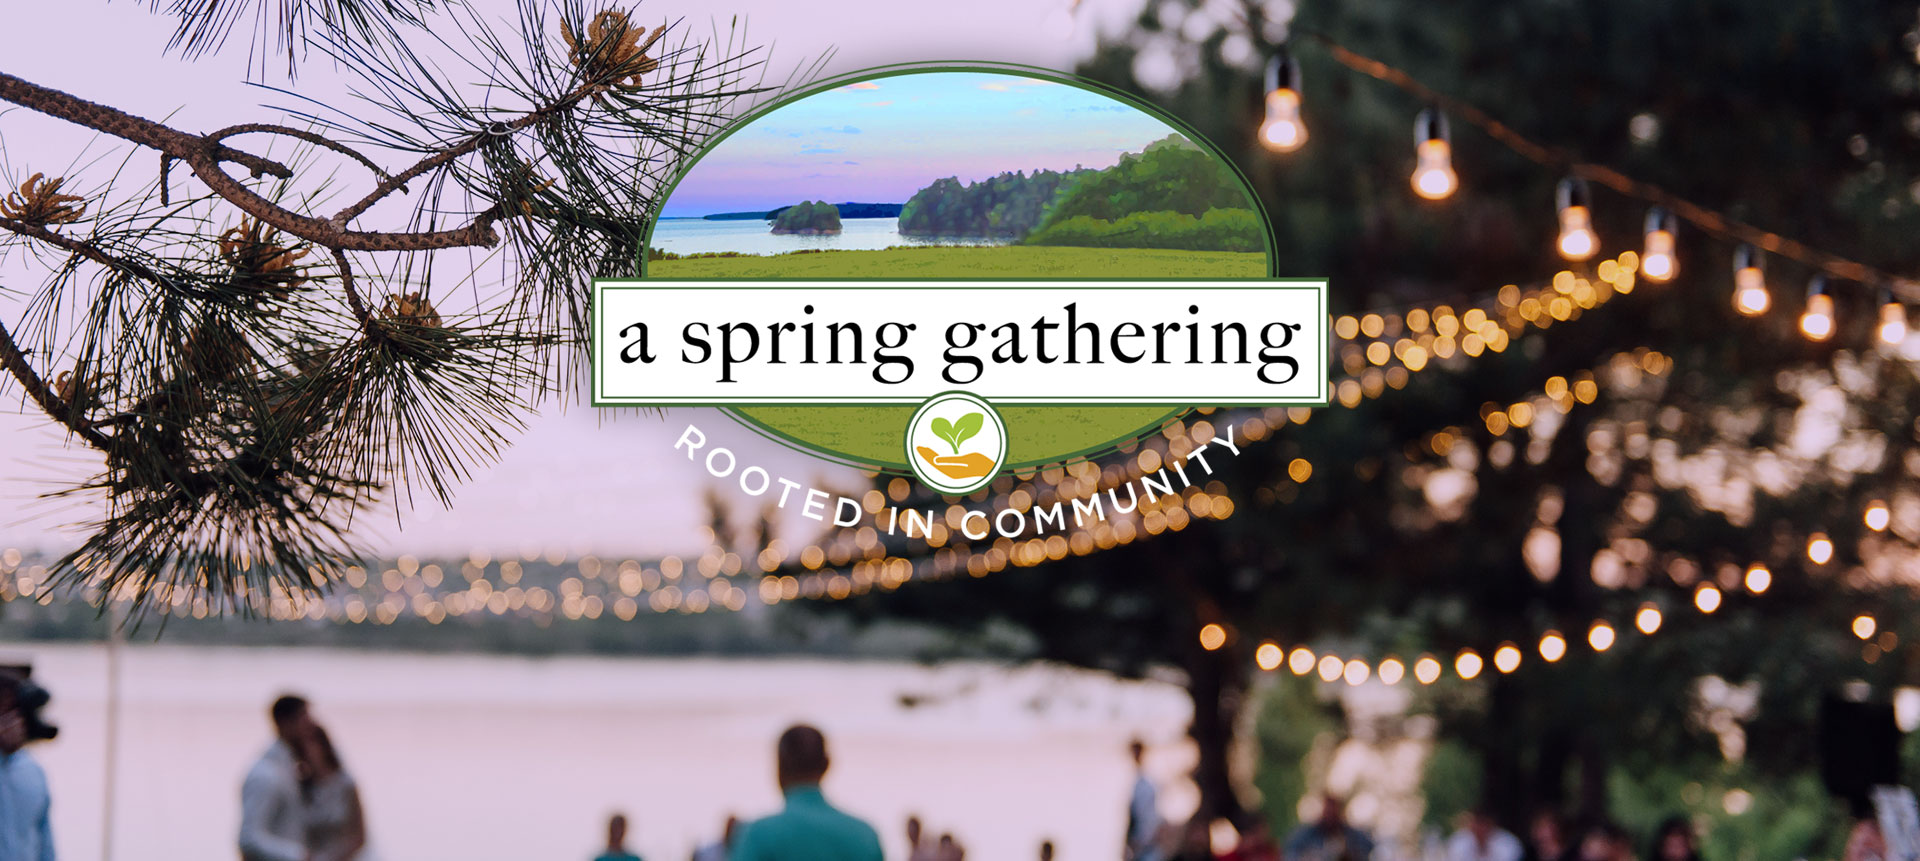 Freeport Community Services A Spring Gathering